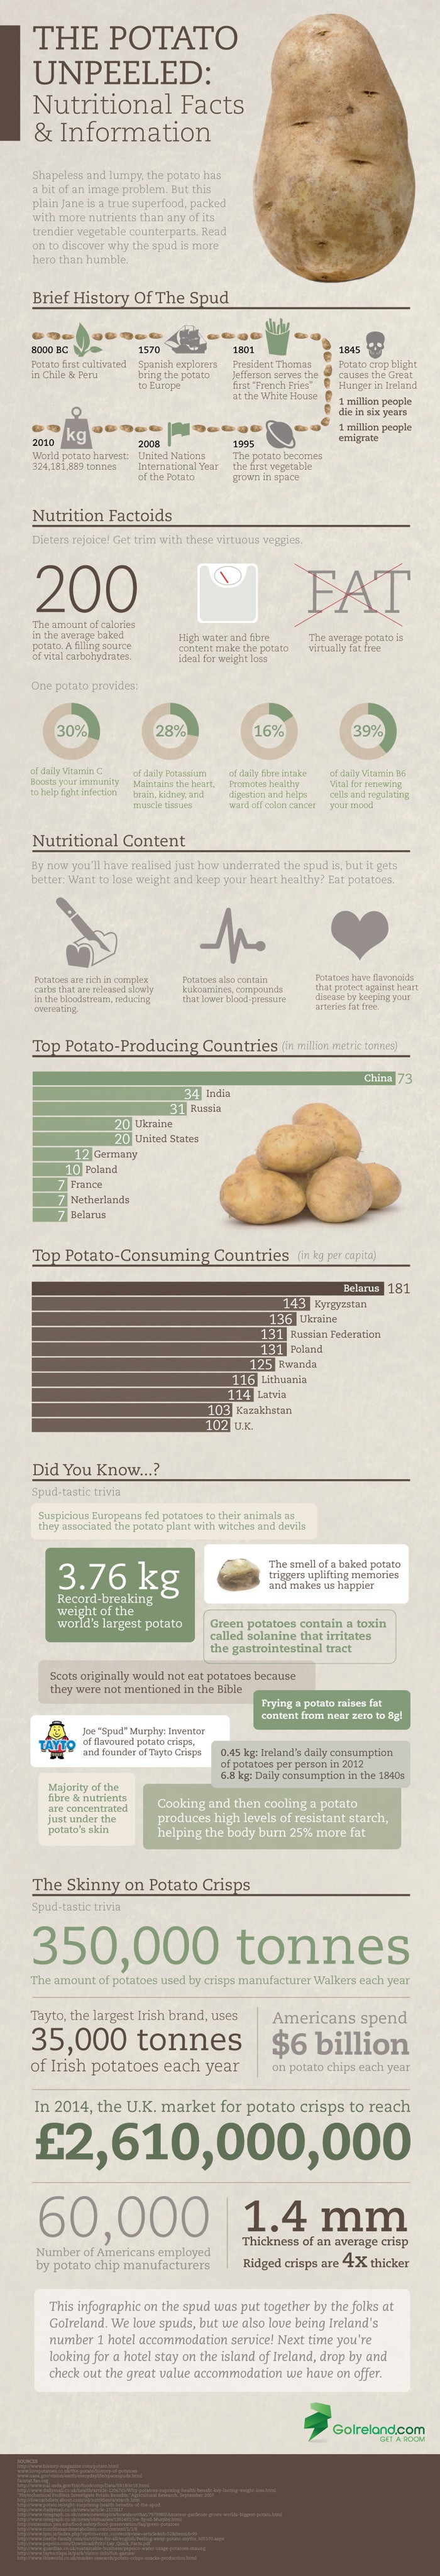 Potato Nutrition Information
 The Potato Unpeeled Nutritional Facts & Information